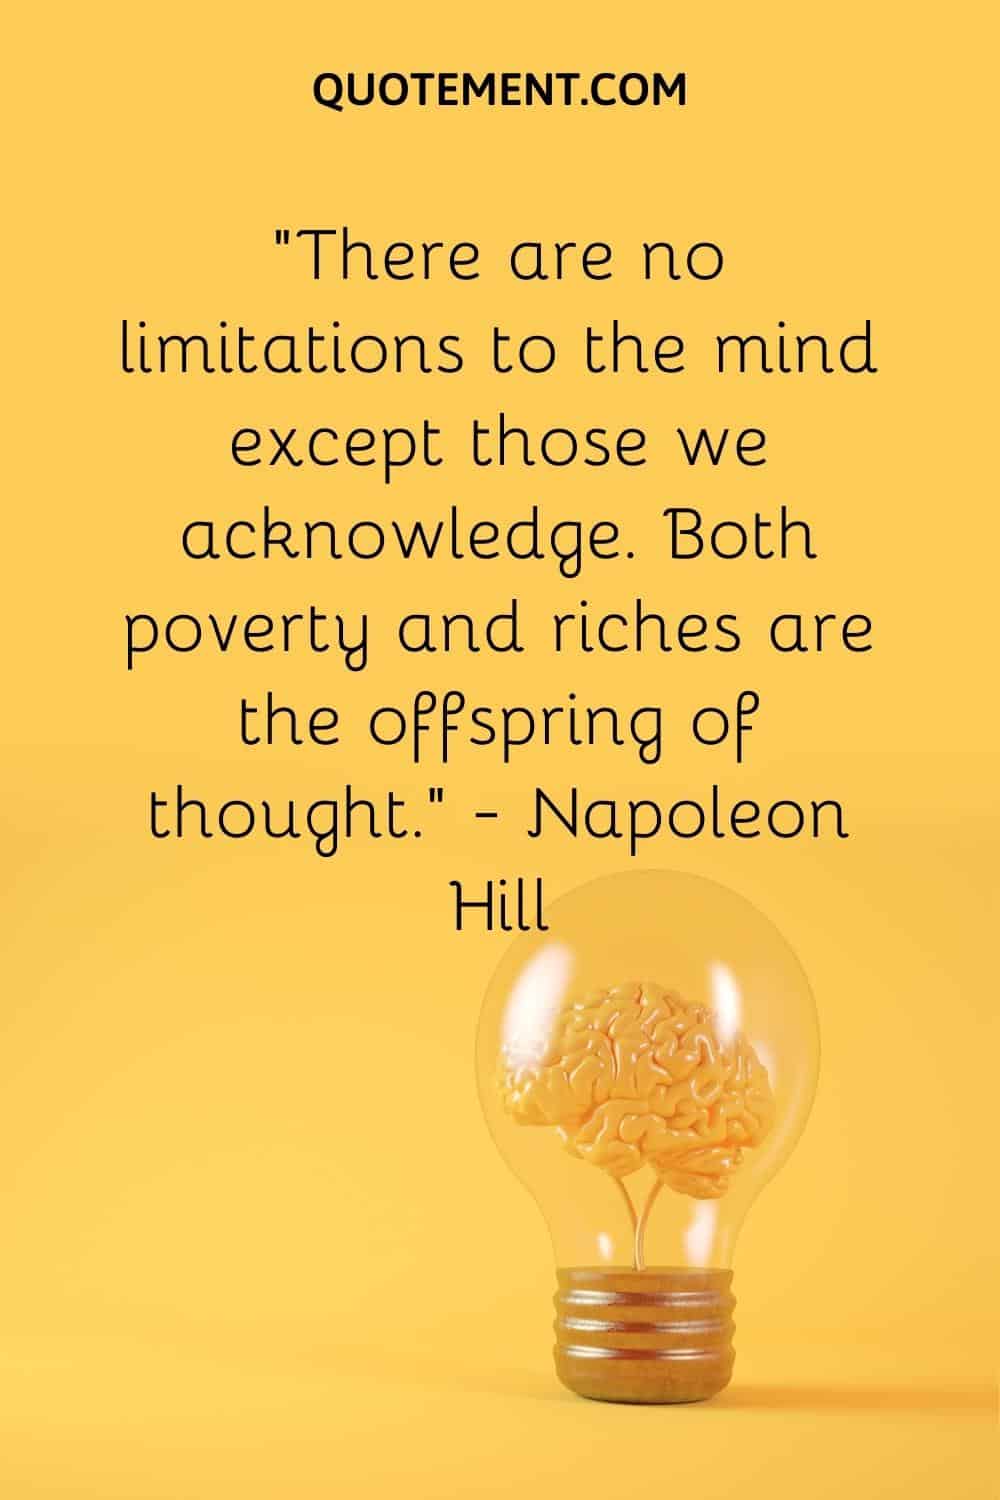 . “There are no limitations to the mind except those we acknowledge. Both poverty and riches are the offspring of thought.” — Napoleon Hill